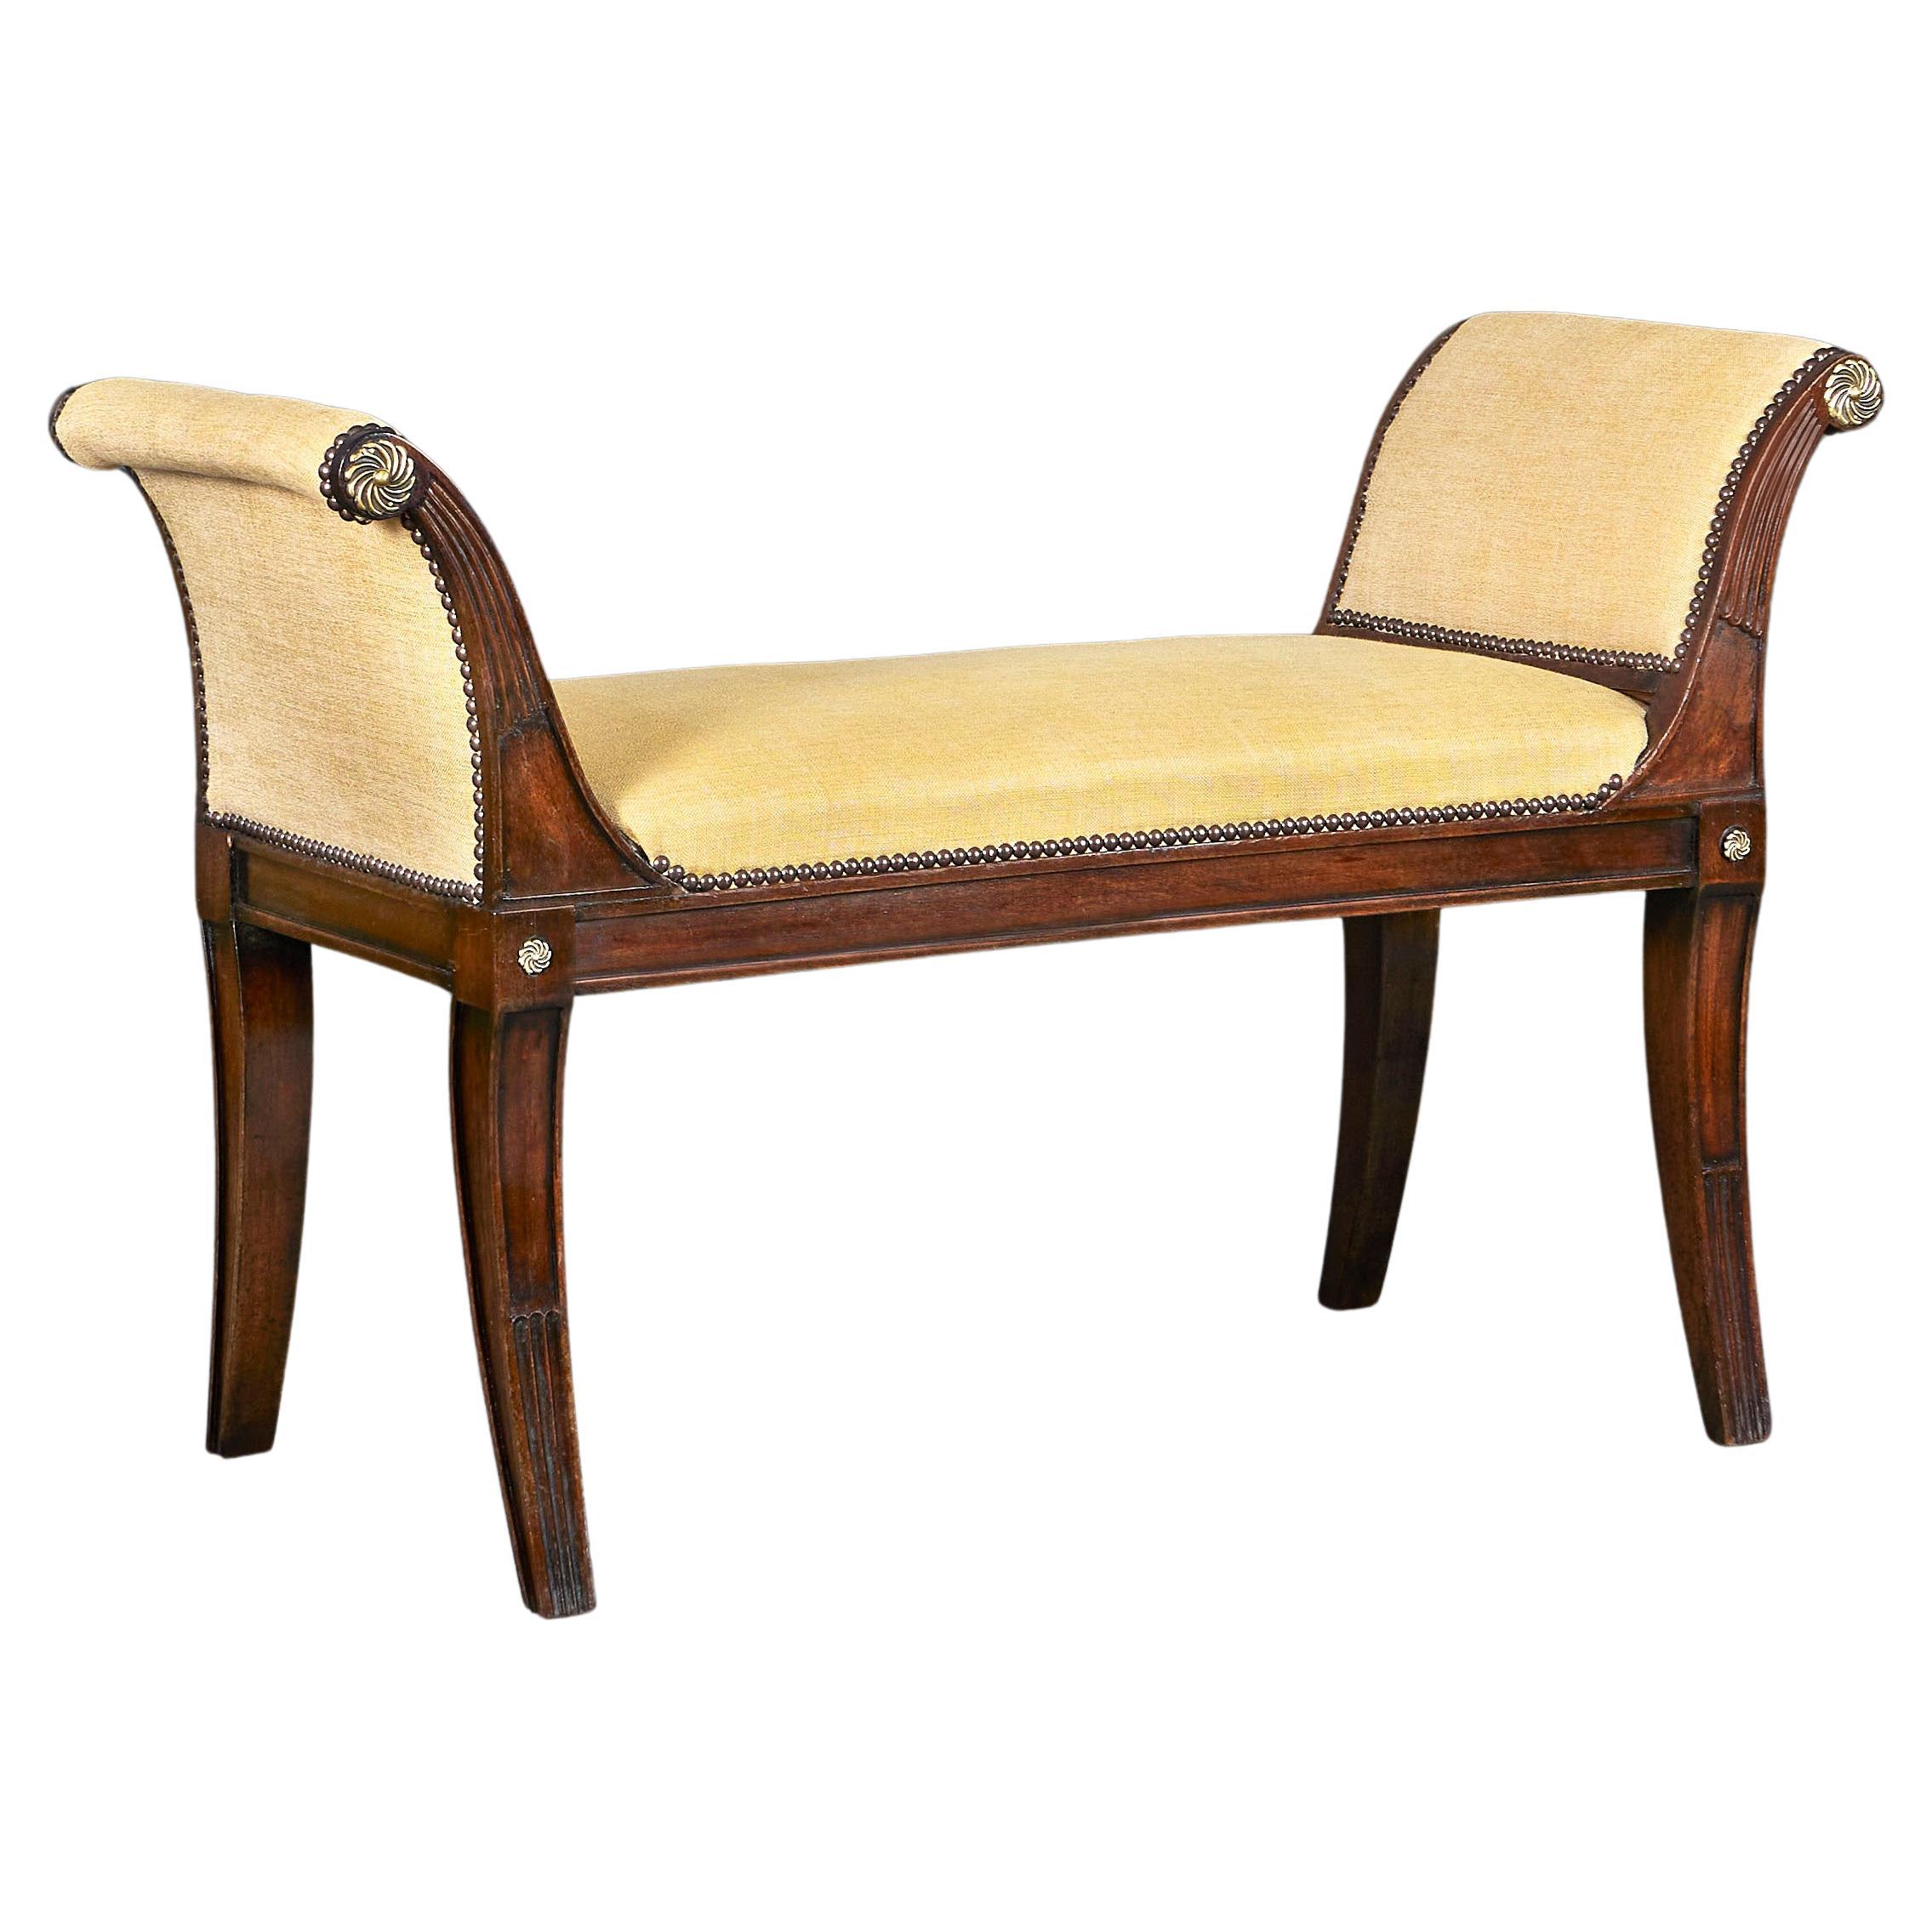 A Regency Mahogany Window Seat with Linen Upholstery  For Sale